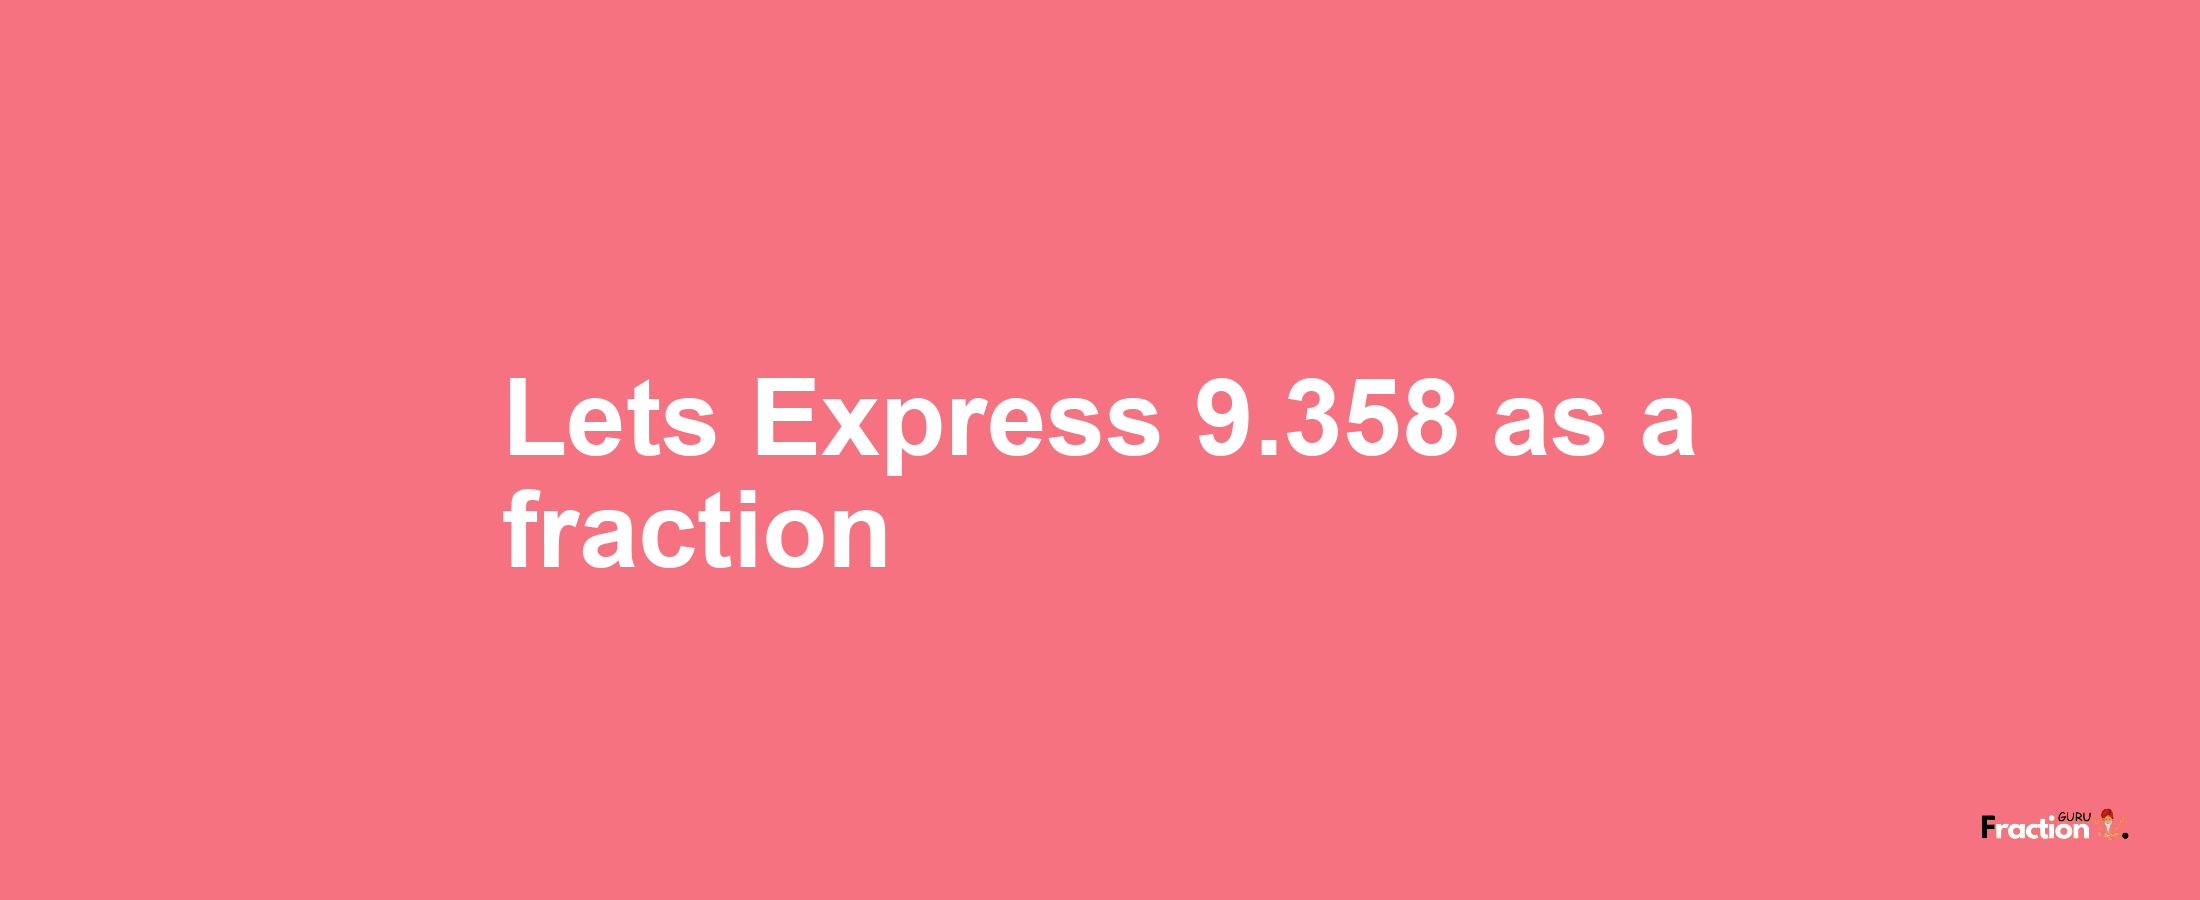 Lets Express 9.358 as afraction